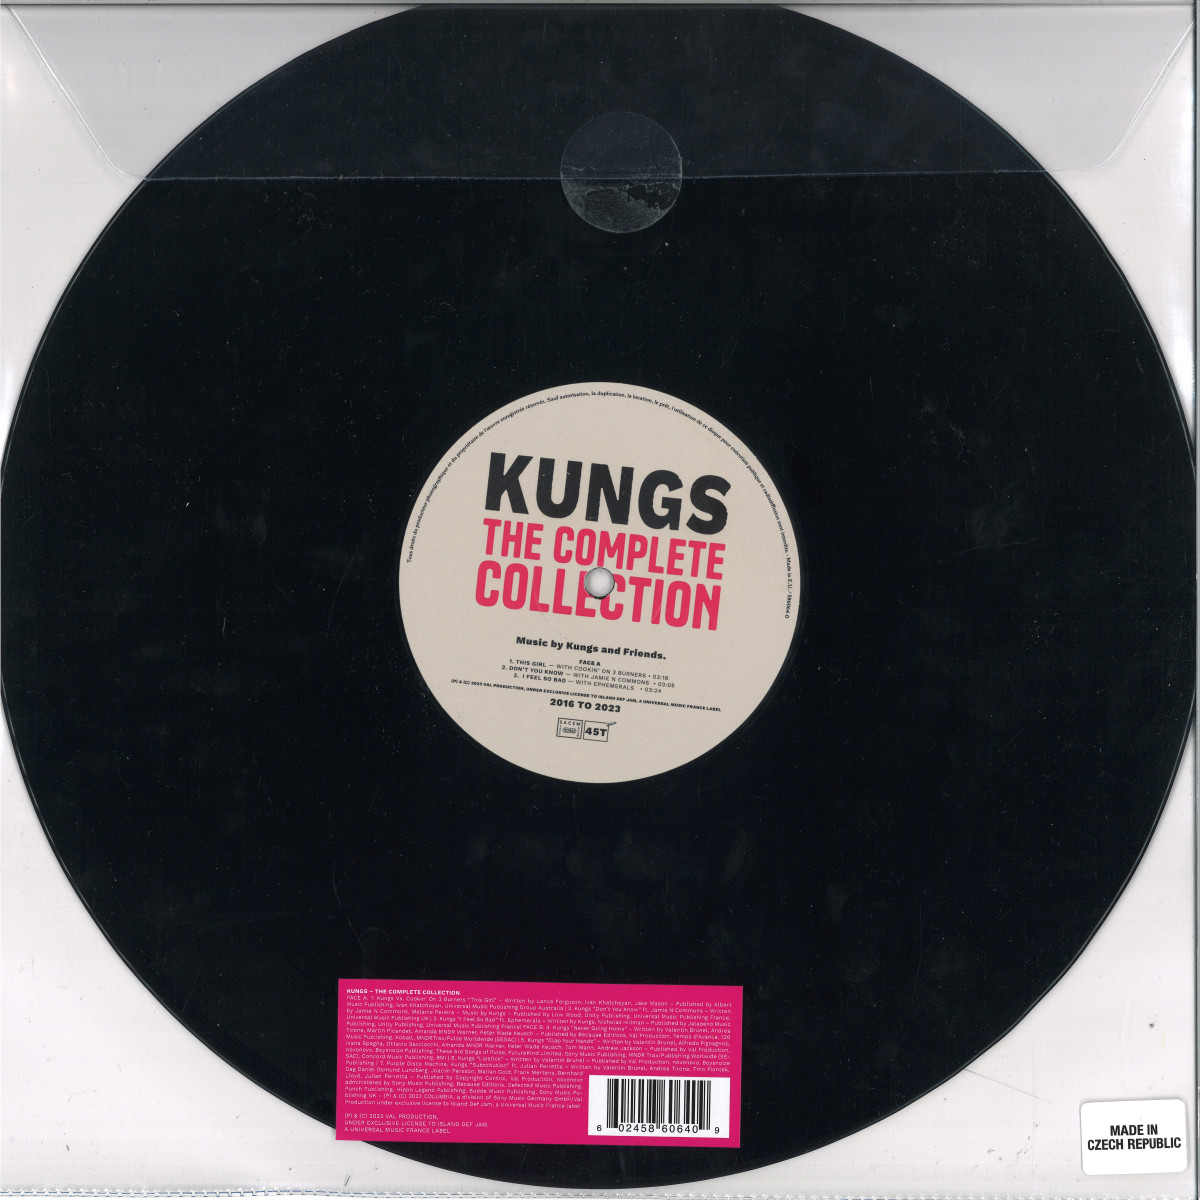 Kungs - The Complete Collection LP / Universal Music Germany 5860640 - Vinyl